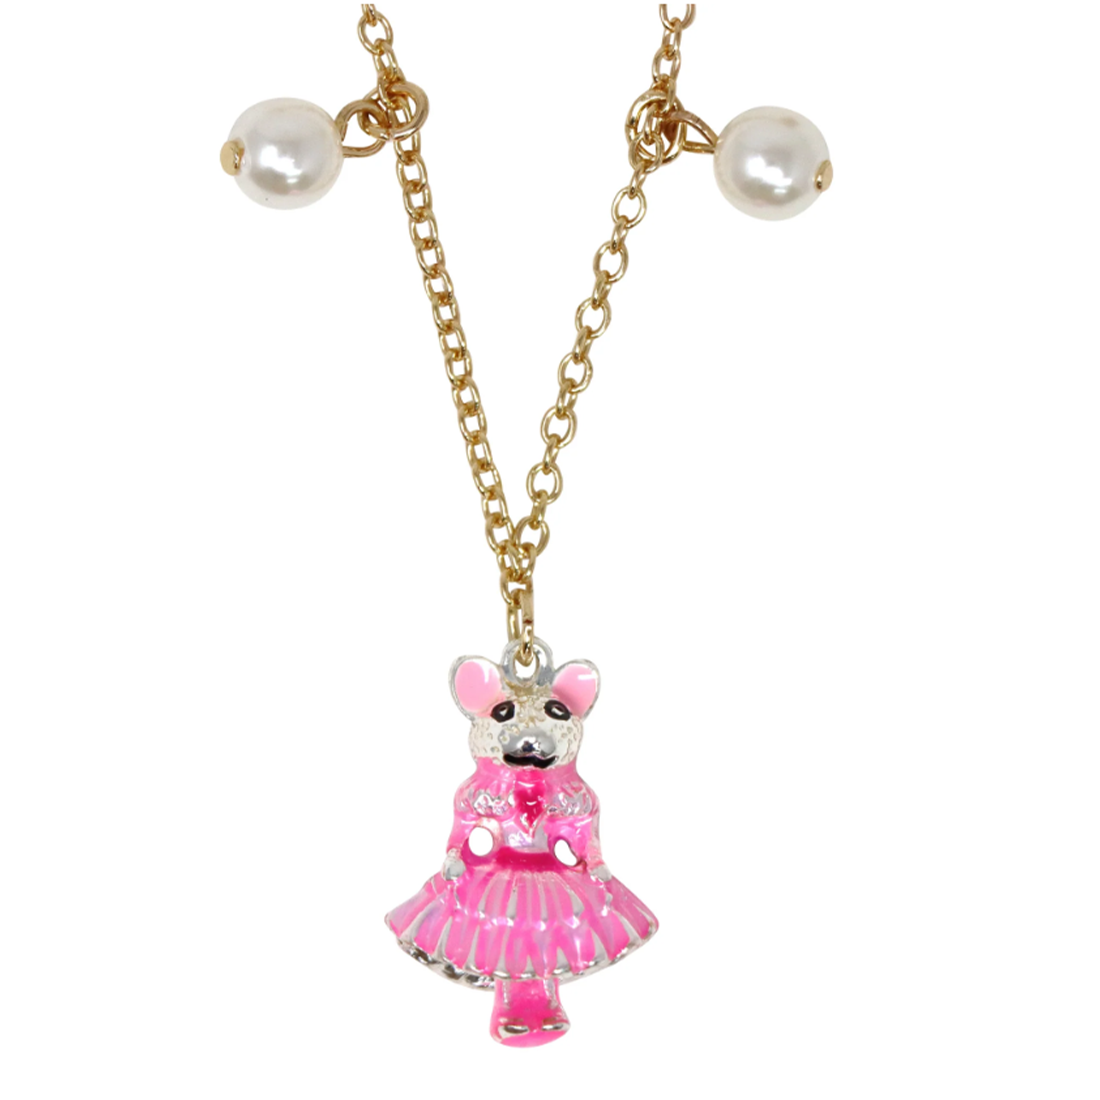 Claris - The Chicest Mouse in Paris Charm Necklace